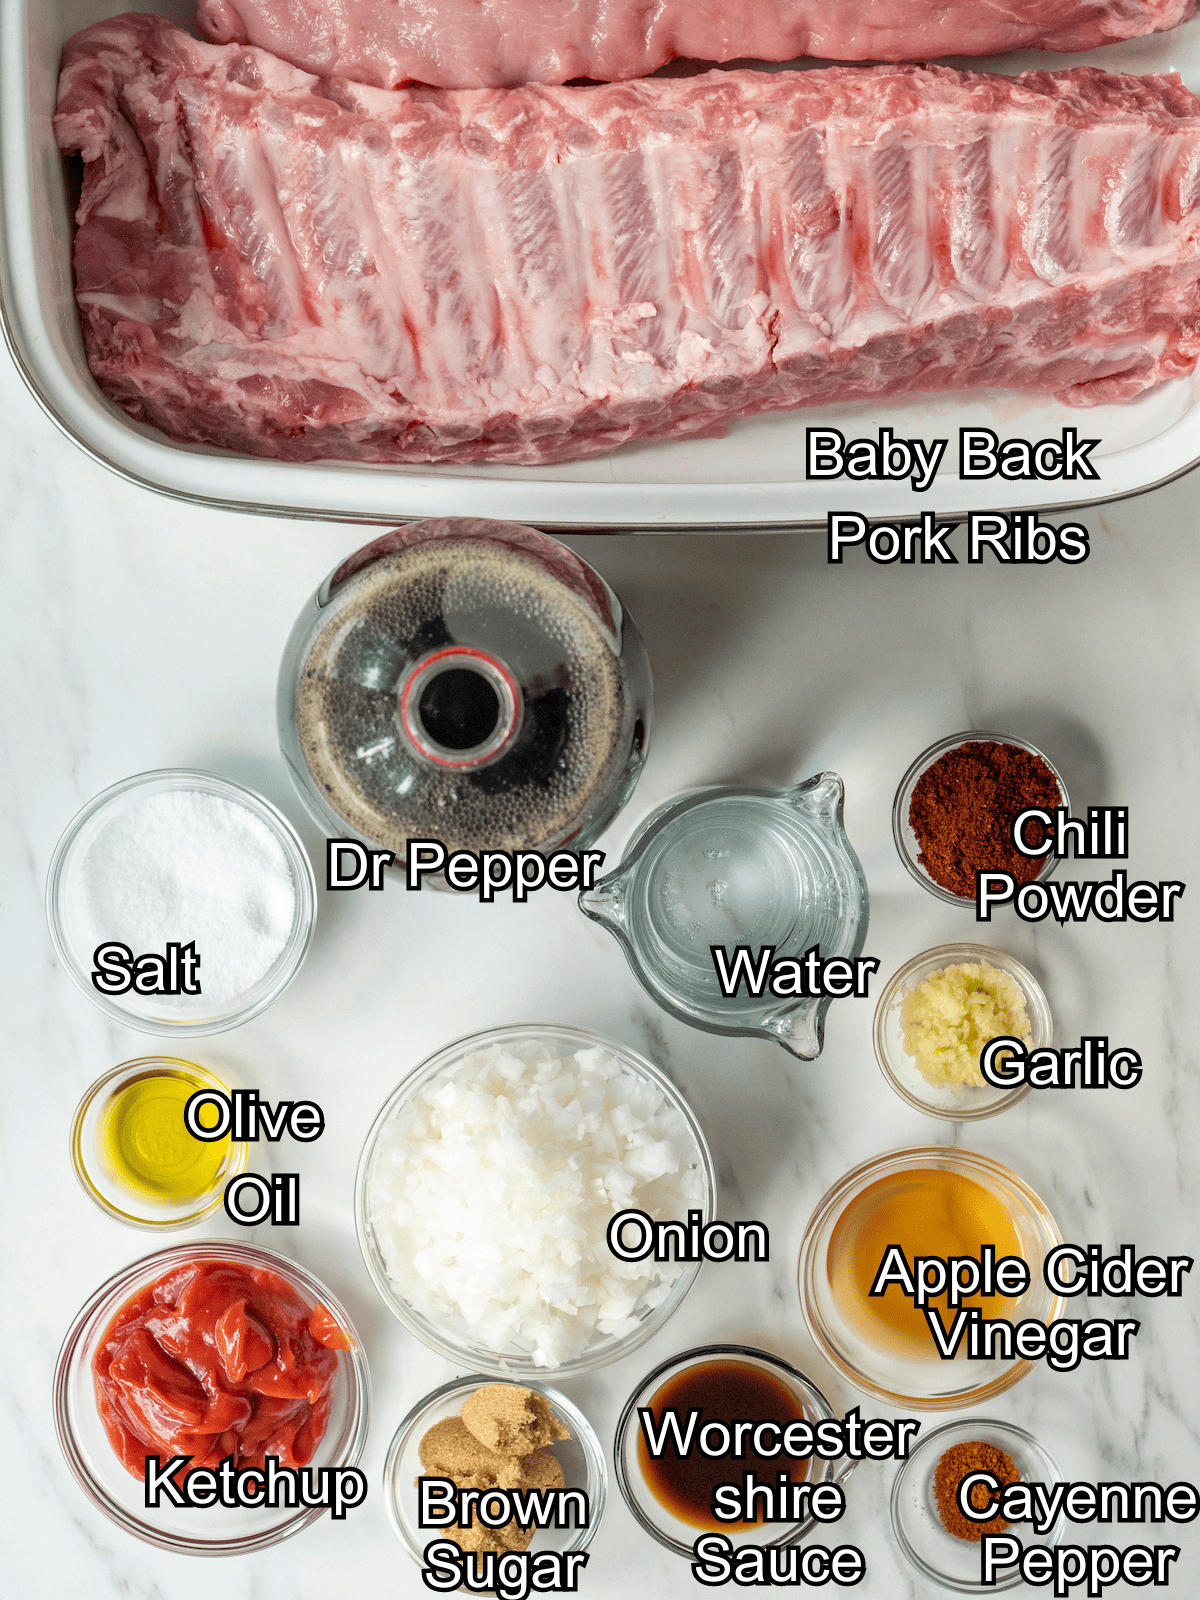 mise-en-place with all the ingredients required to make BBQ baby back ribs.